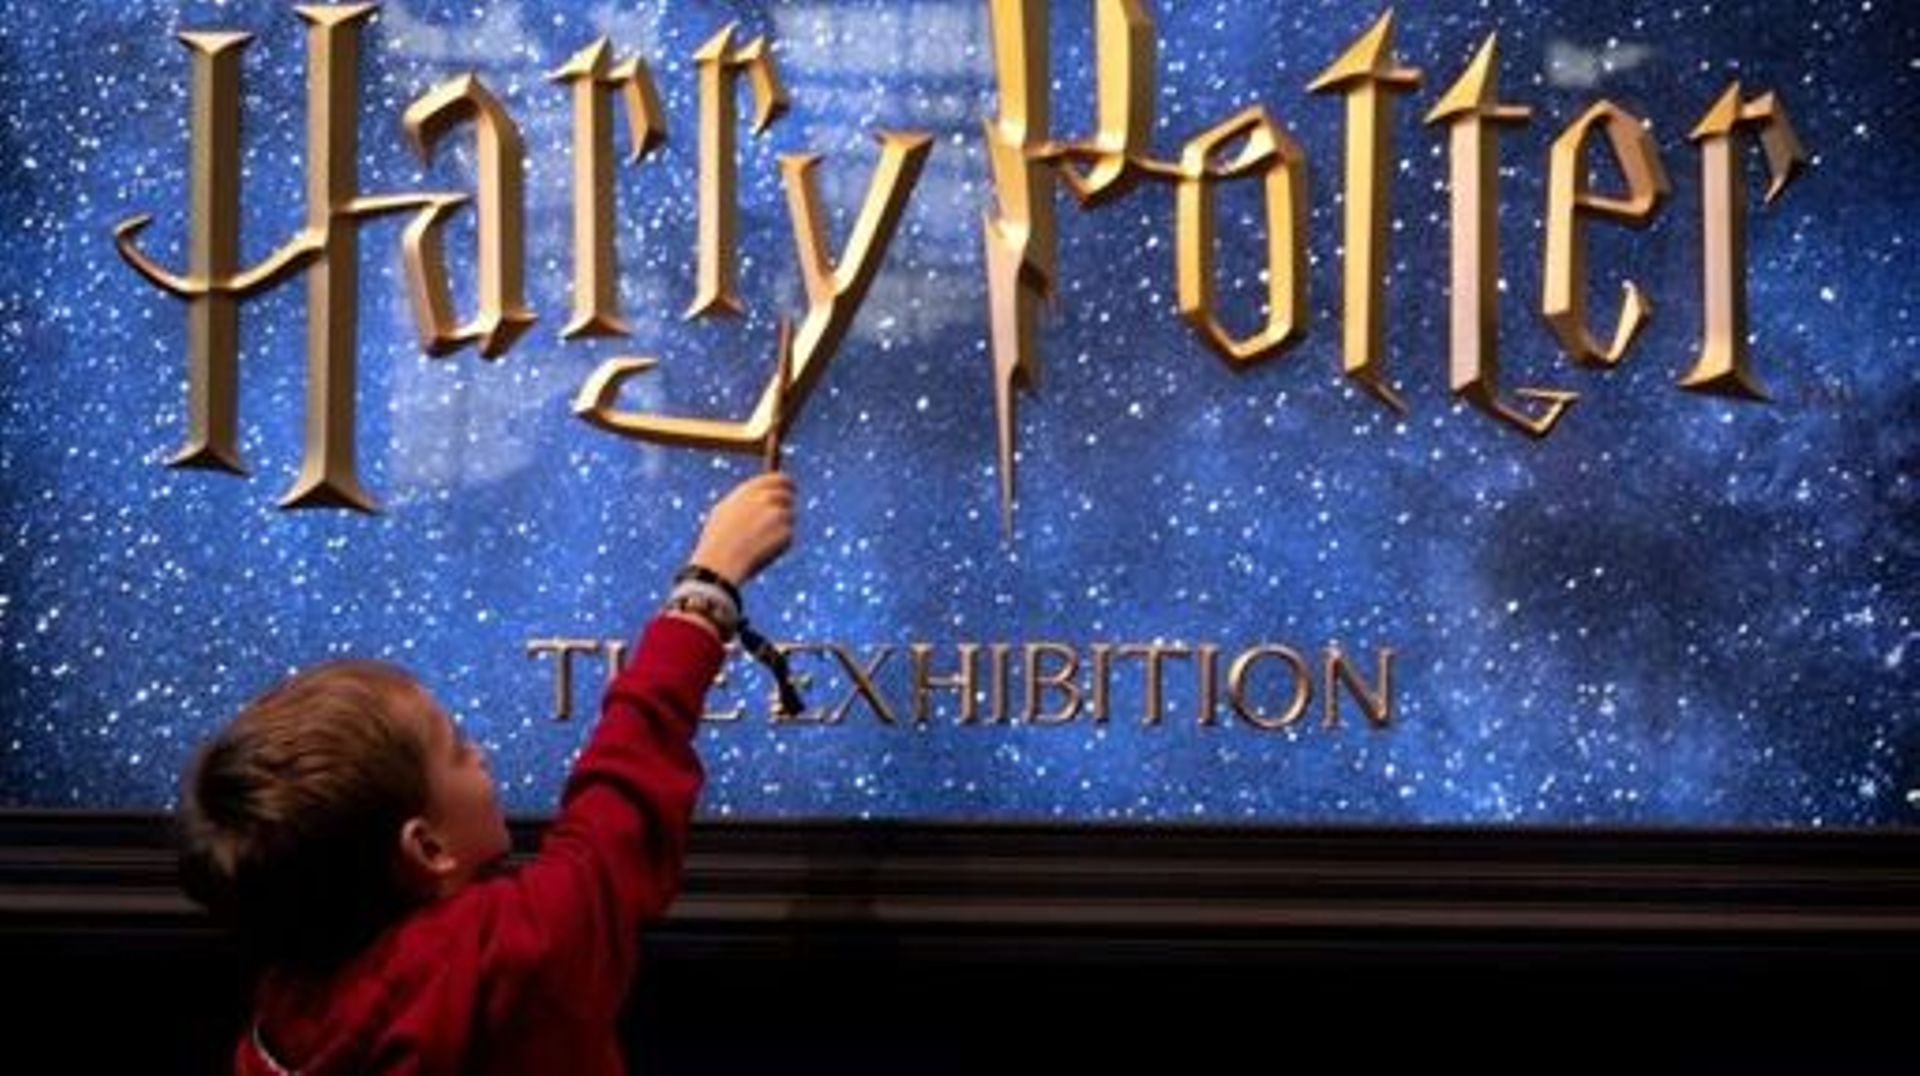 A young visitor holds a magic wand during the opening of the European exhibition of Harry Potter in Vienna, Austria on December 16, 2022.   Andrea KLAMAR-HUTKOVA / AFP